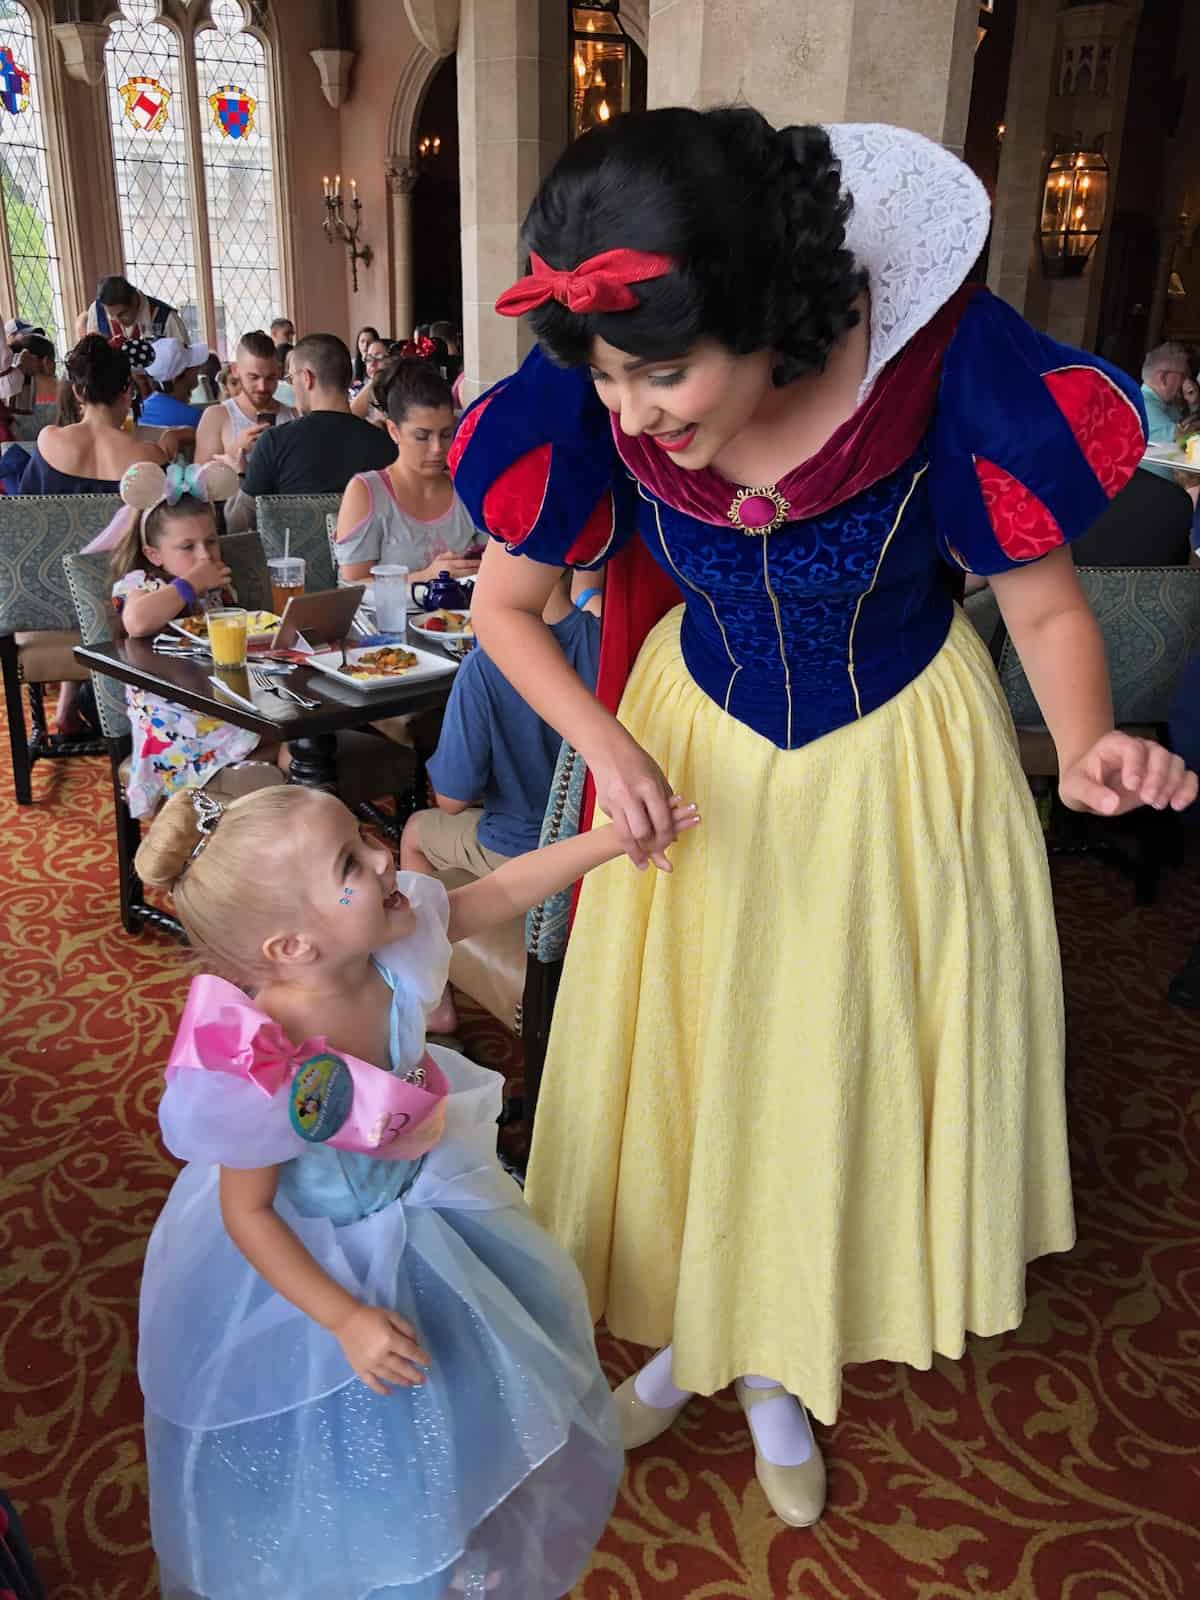 Where is the best place to meet princesses at Disney World? 